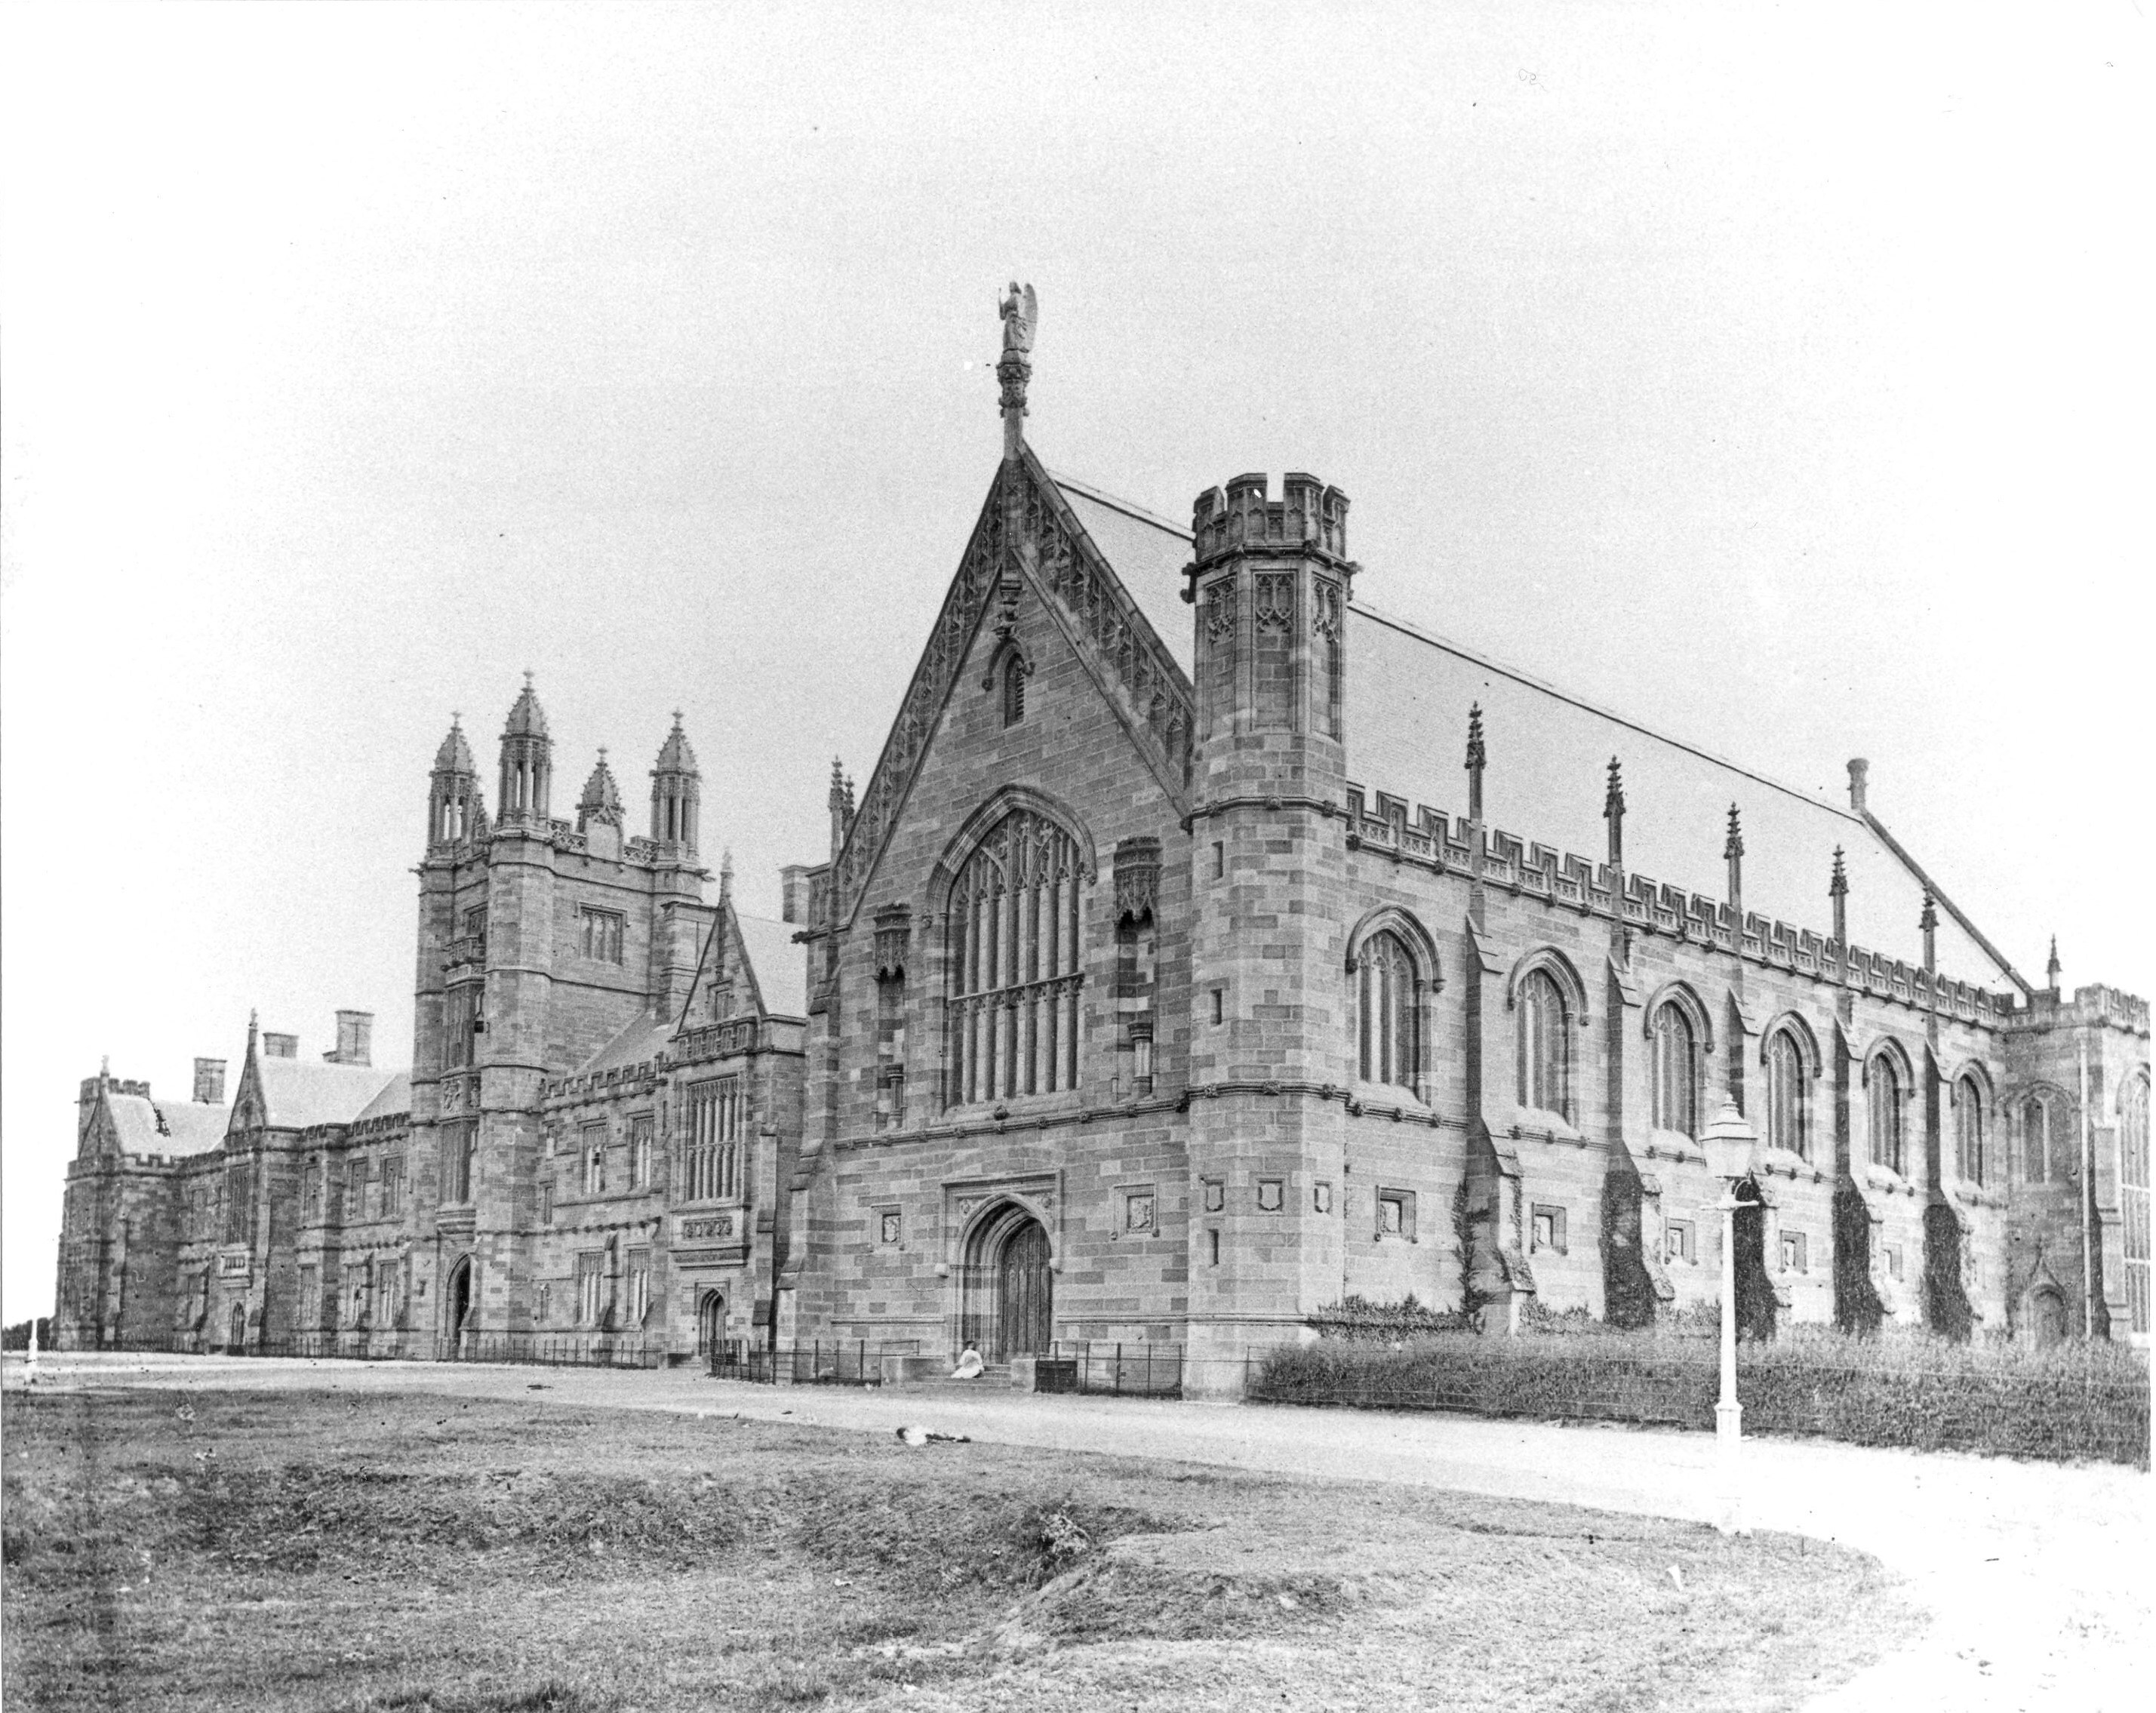 GREAT HALL AND MAIN BUILDING